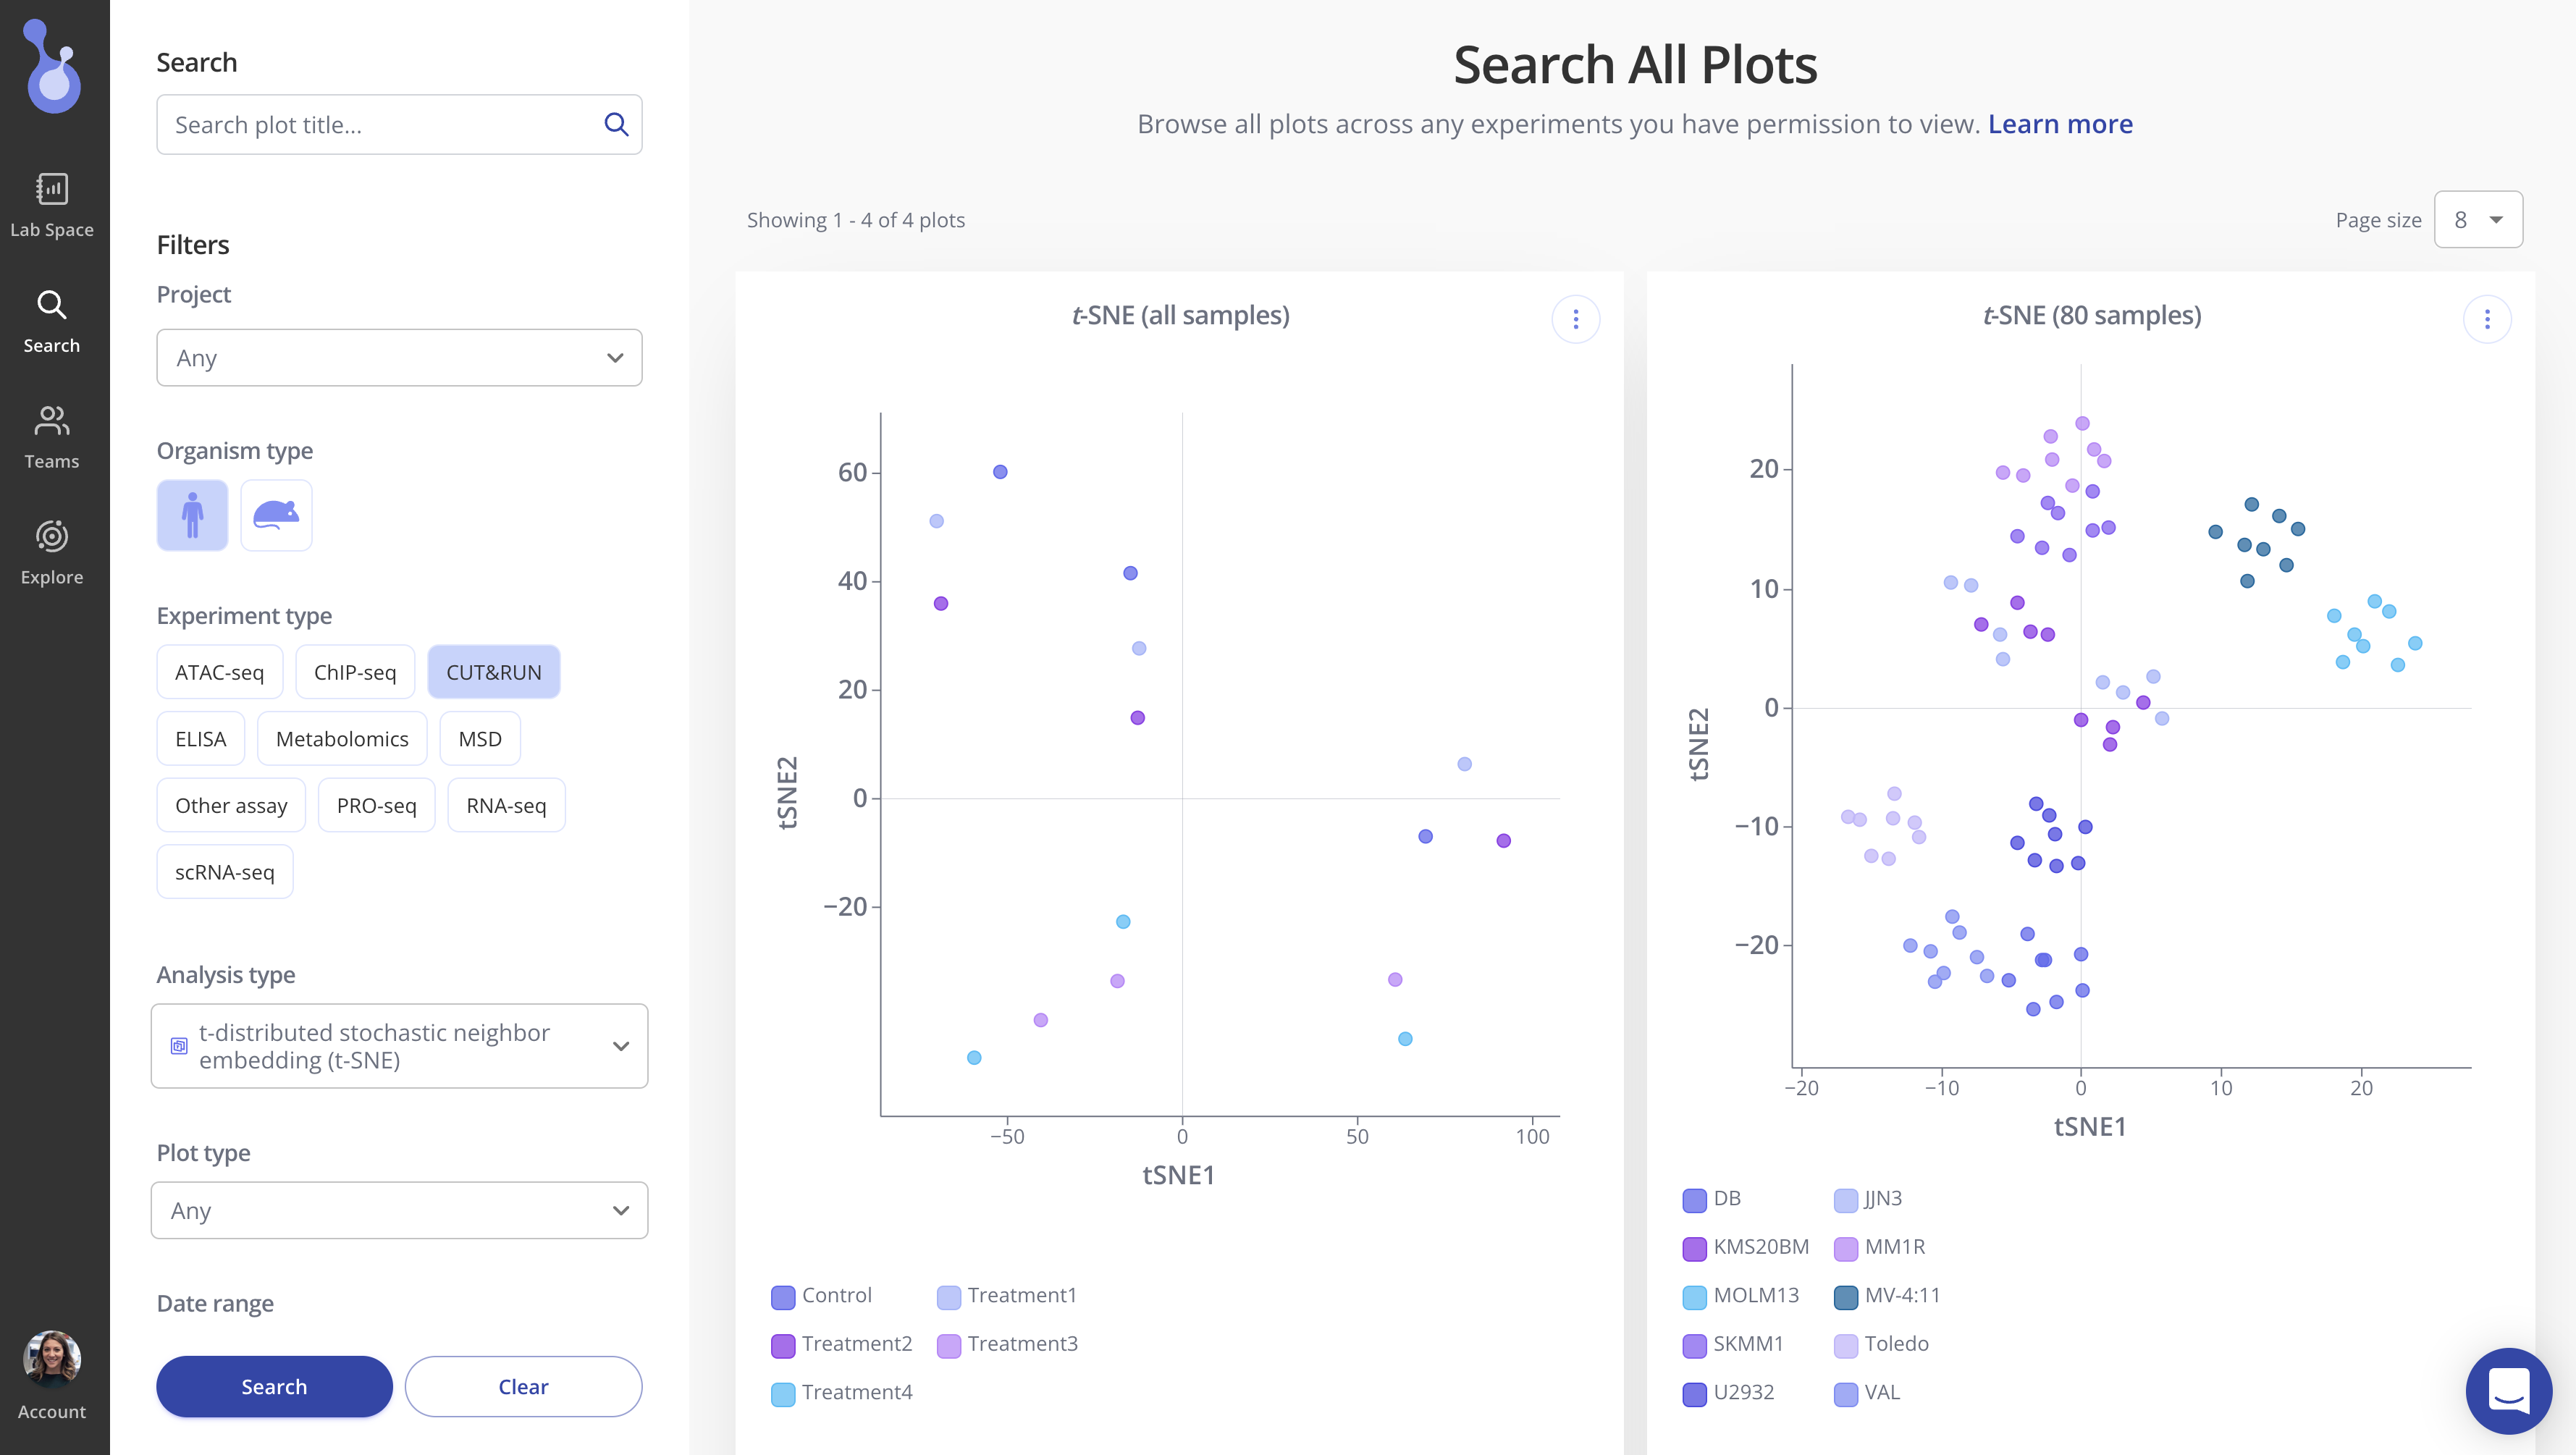 Example of searching for plots by analysis type